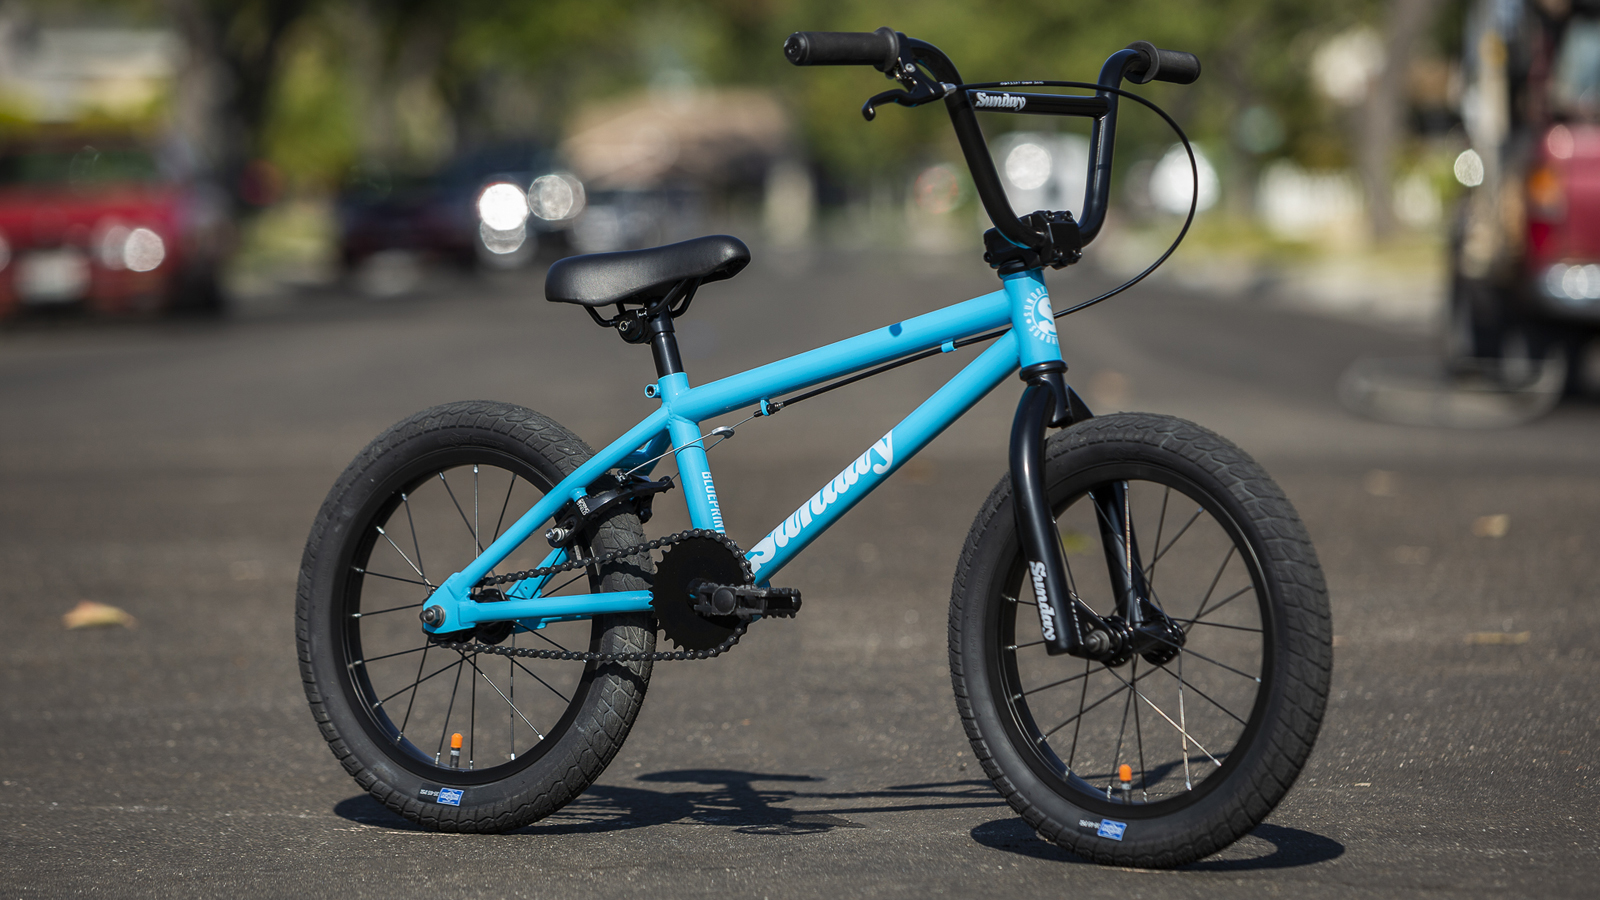 5. One vs Two Brakes: Which is Better for BMX Riding?